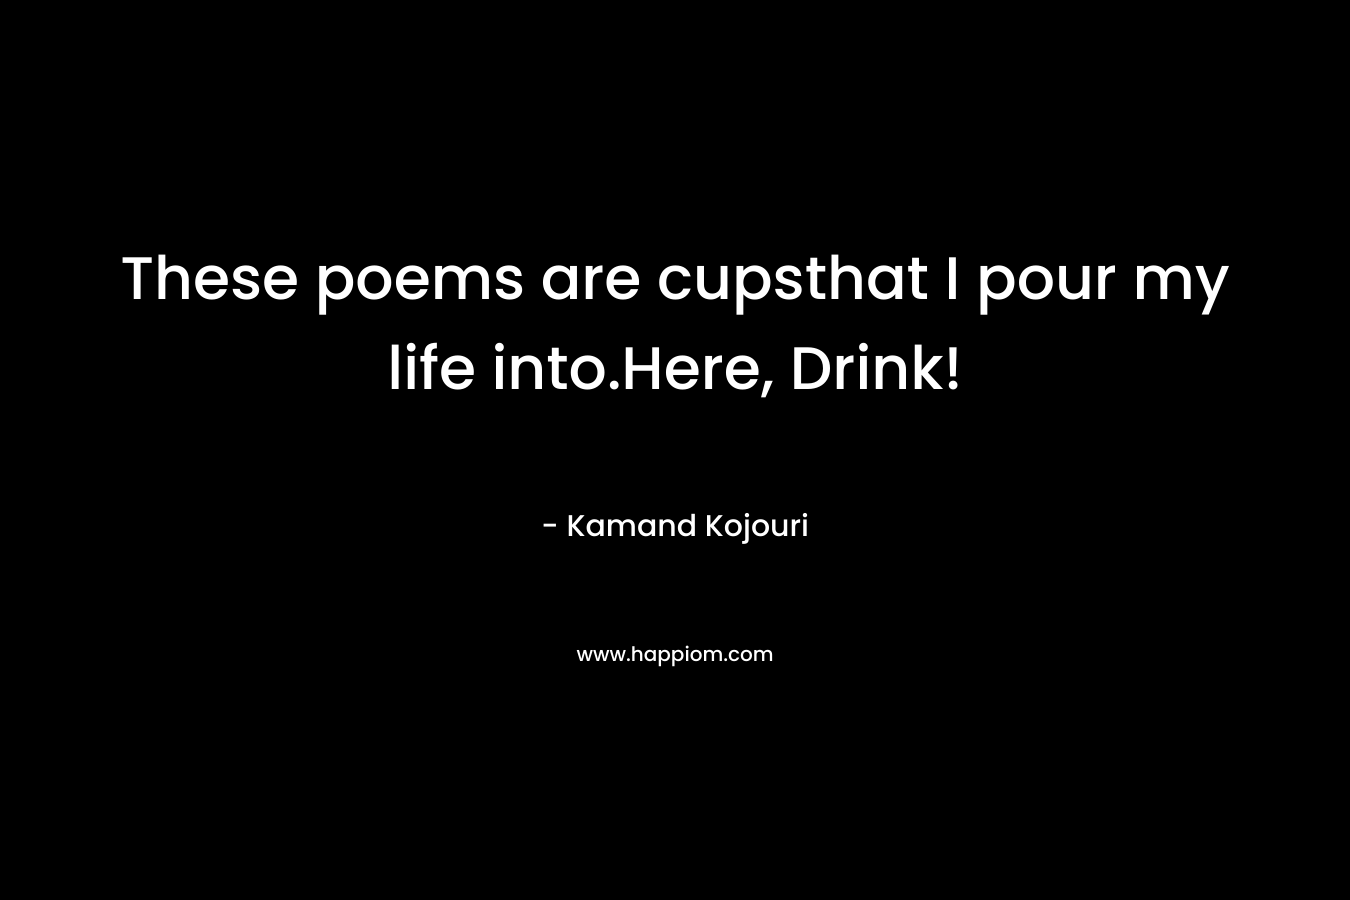 These poems are cupsthat I pour my life into.Here, Drink!